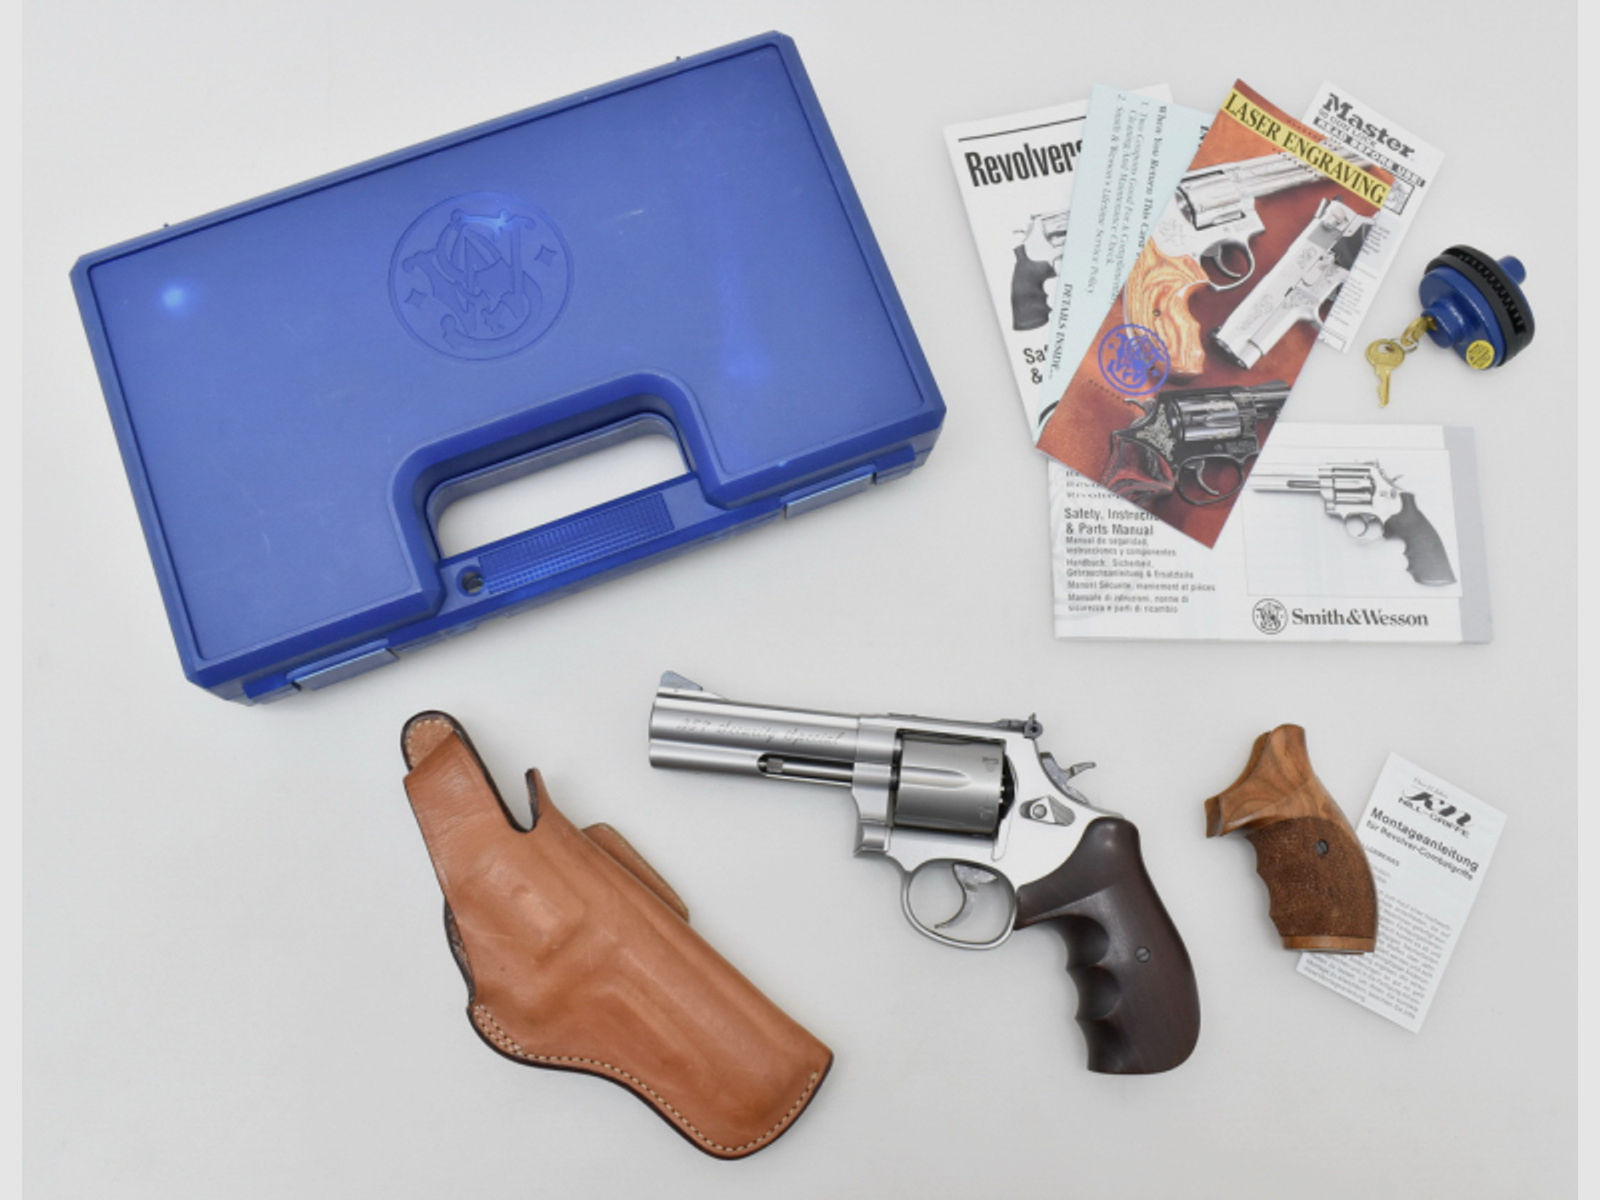 SMITH & WESSON Stainless Revolver Modell 686 SECURITY SPECIAL mit 4" Lauf Kal .357 Magnum in der OVP